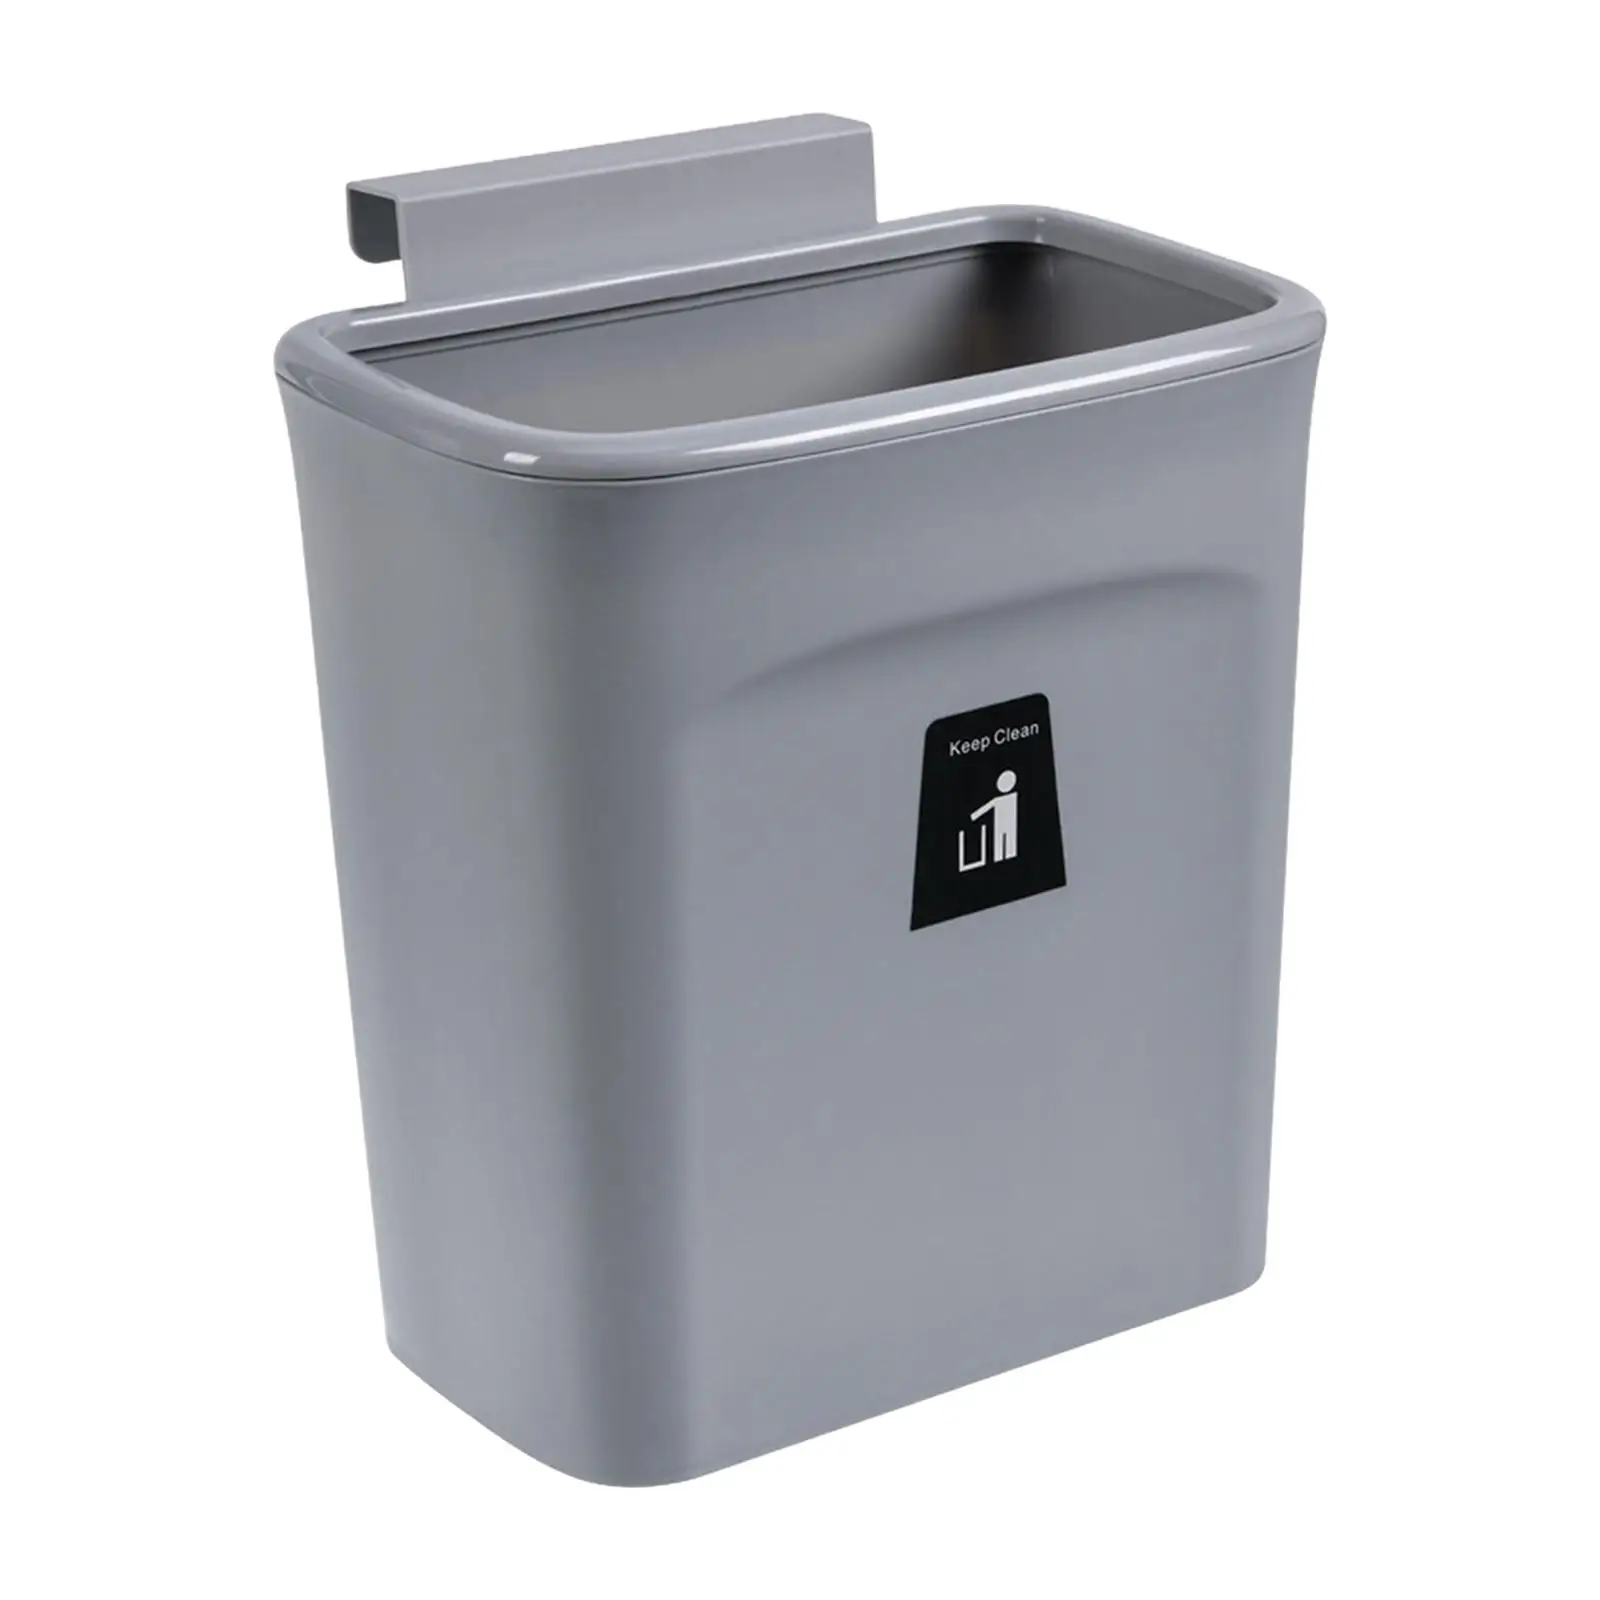 Wall Mounted Counter Waste Compost Bin with Lid Kitchen Cabinet Door Hanging Trash Can 9L for Restroom Bathroom Laundry Kitchen